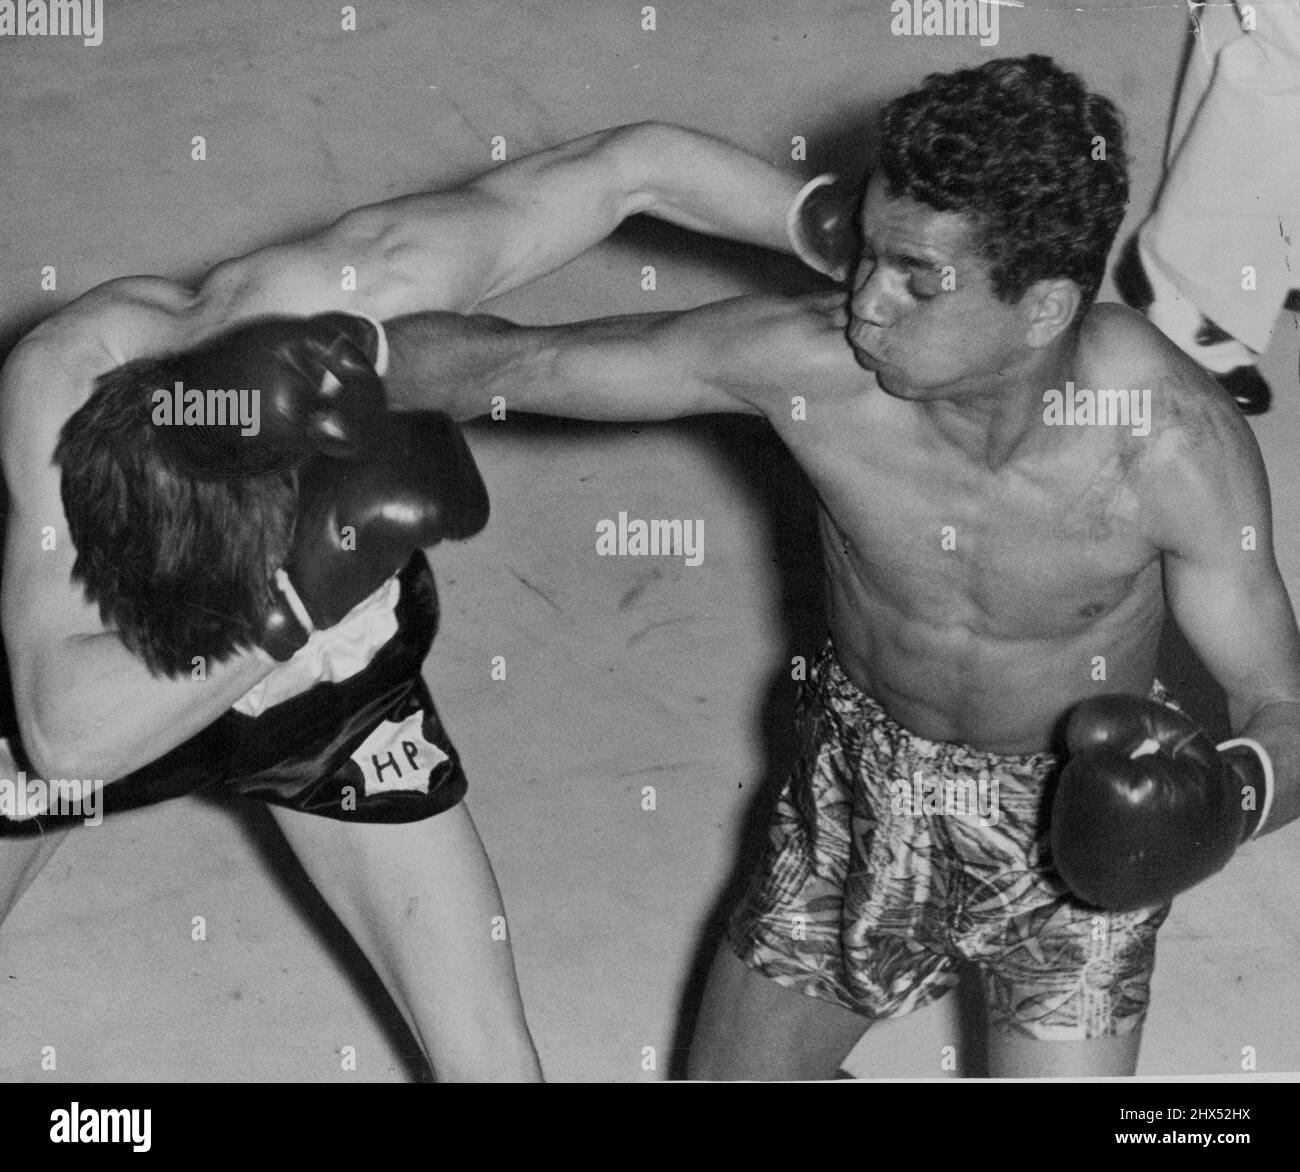 Harold Piper ducks under a right from Russell Sands in their fight at the Stadium last night. At the same time Piper lands a left on his opponent's head. Sands won a tough battle on points. October 06, 1954. Stock Photo